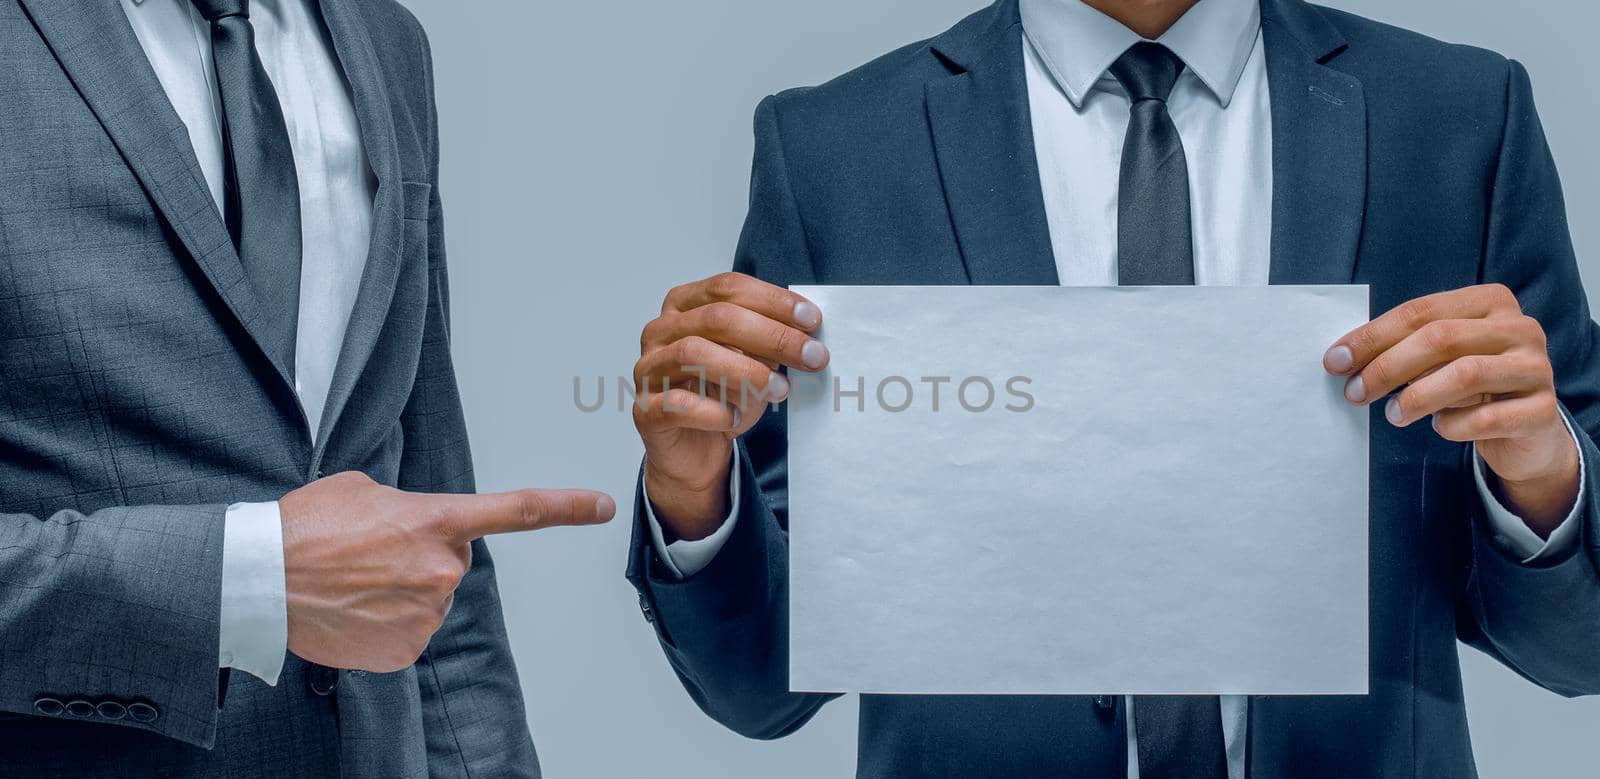 two happy men holding blank placard jver white background